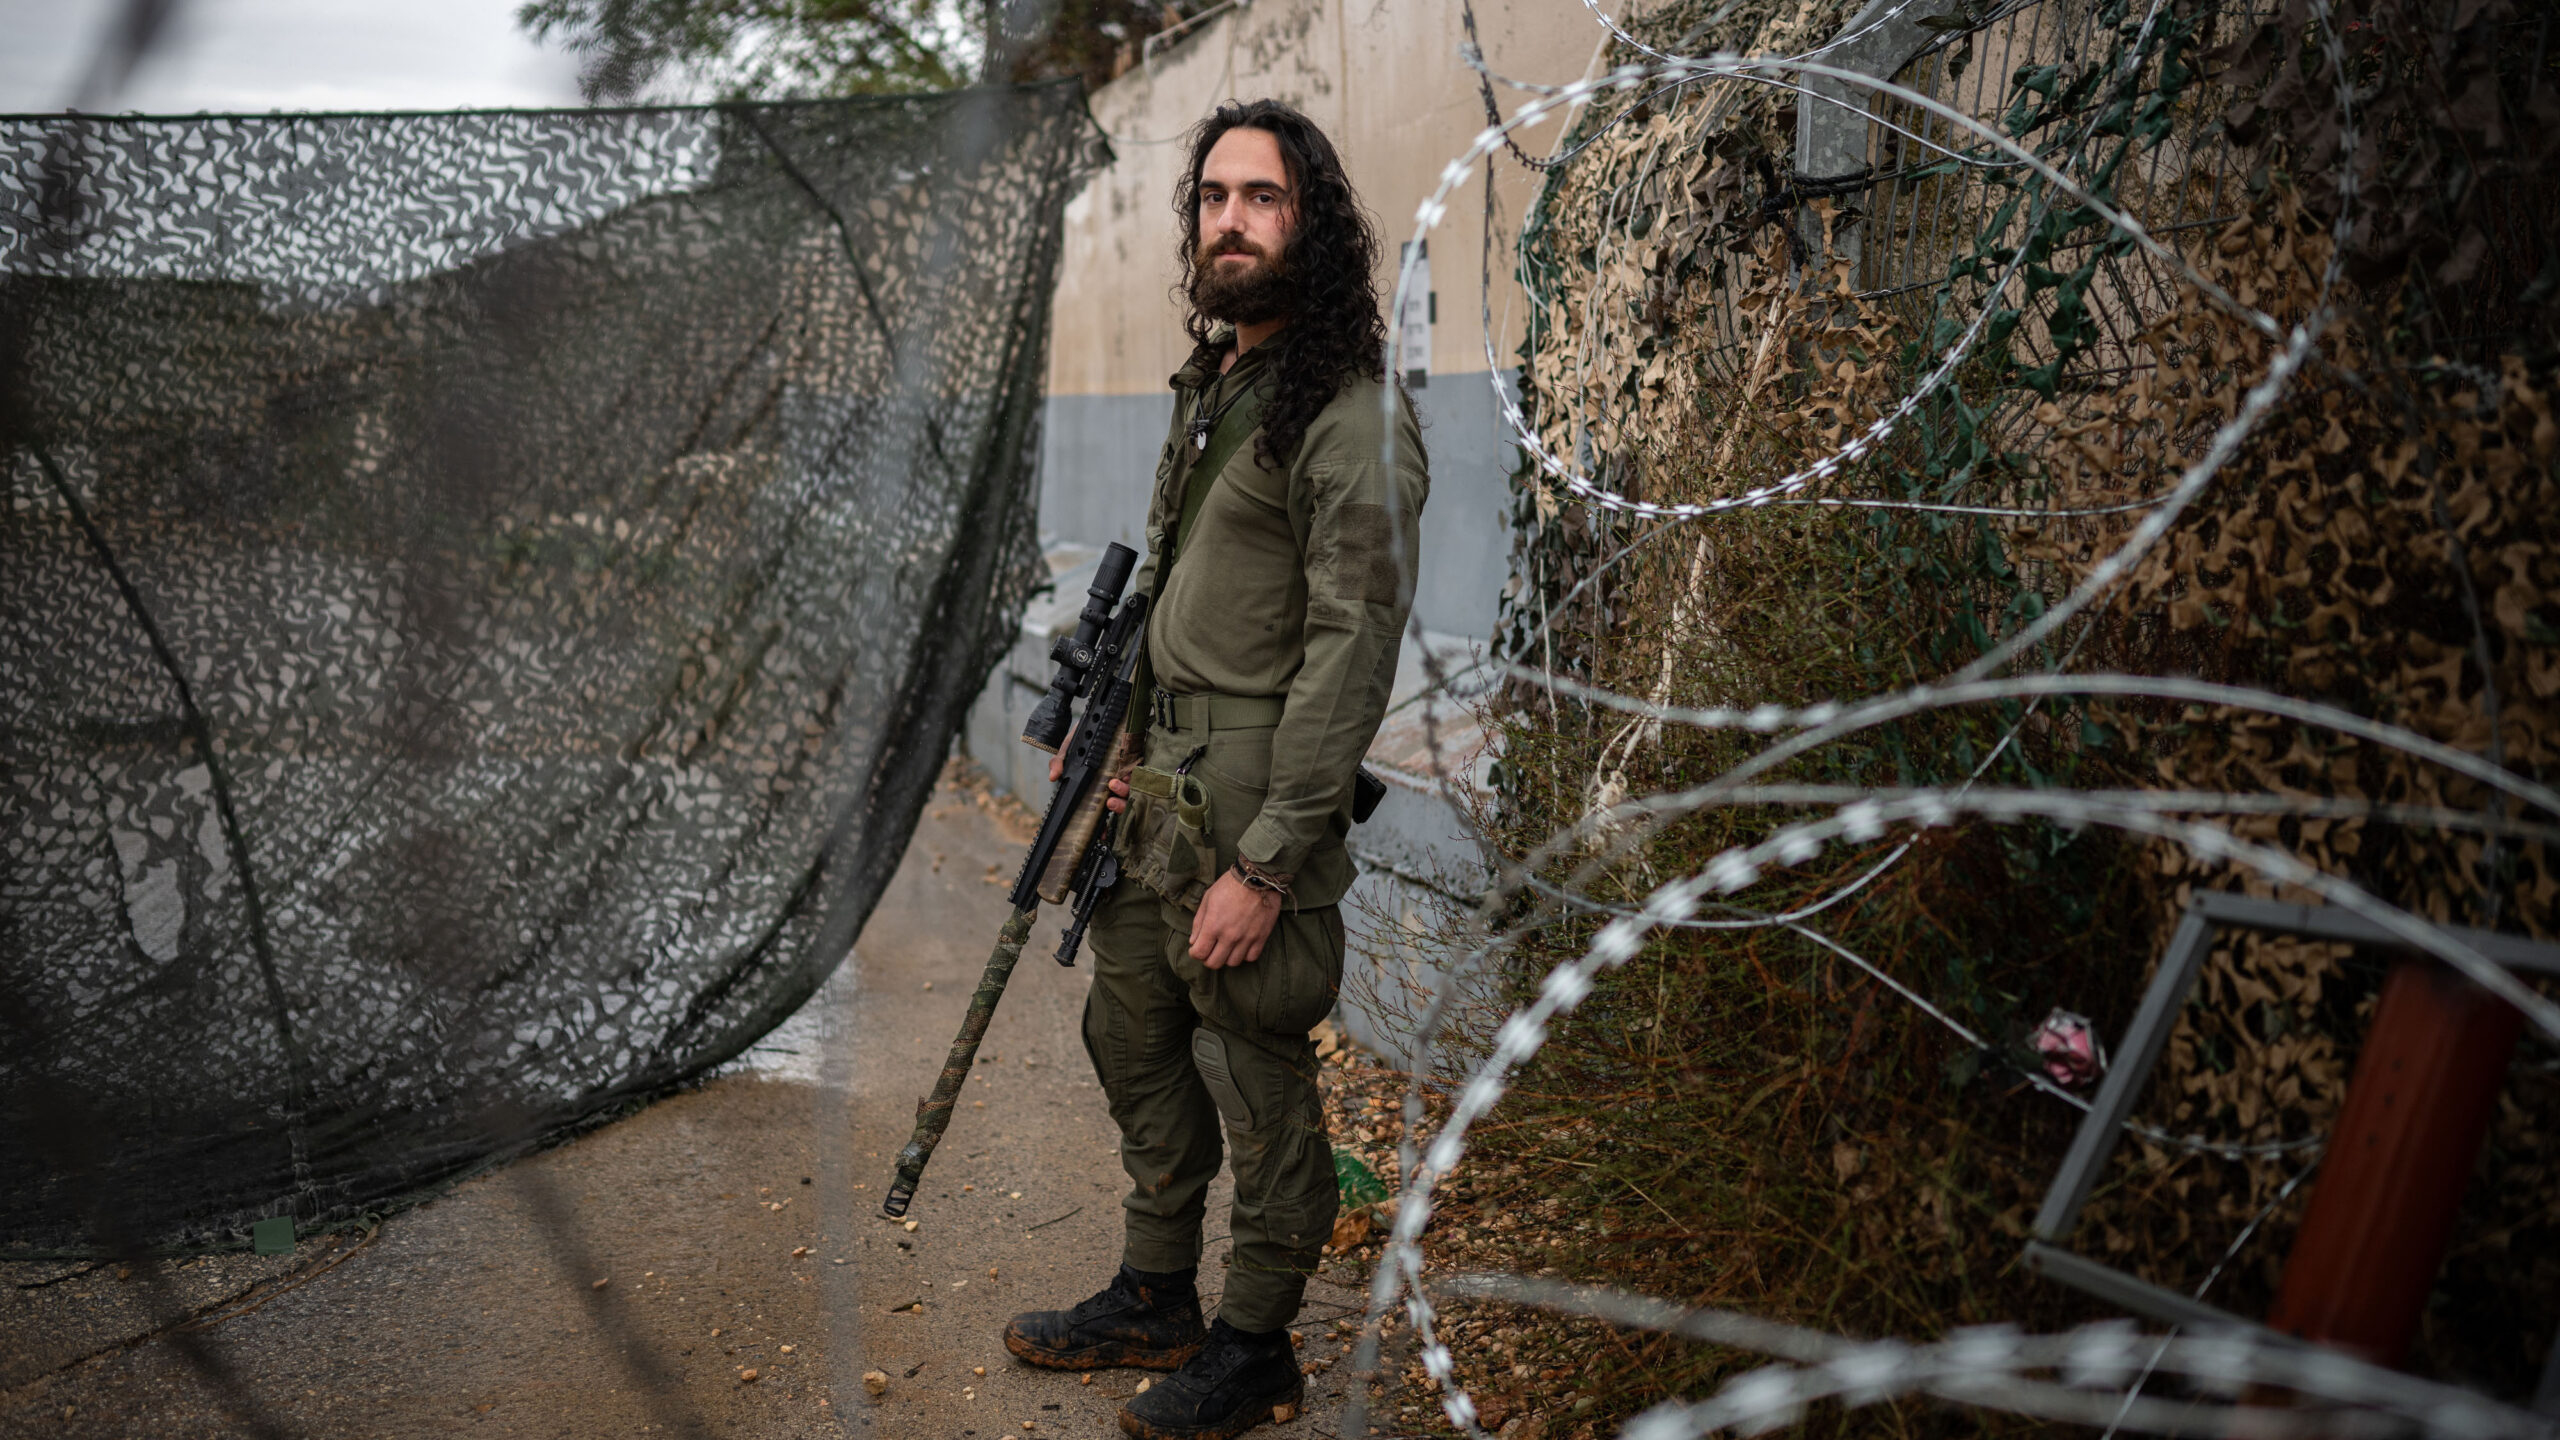 Amit Michelson, an Israeli military reservist, stands for a portrait at a military base near the border with Lebanon in